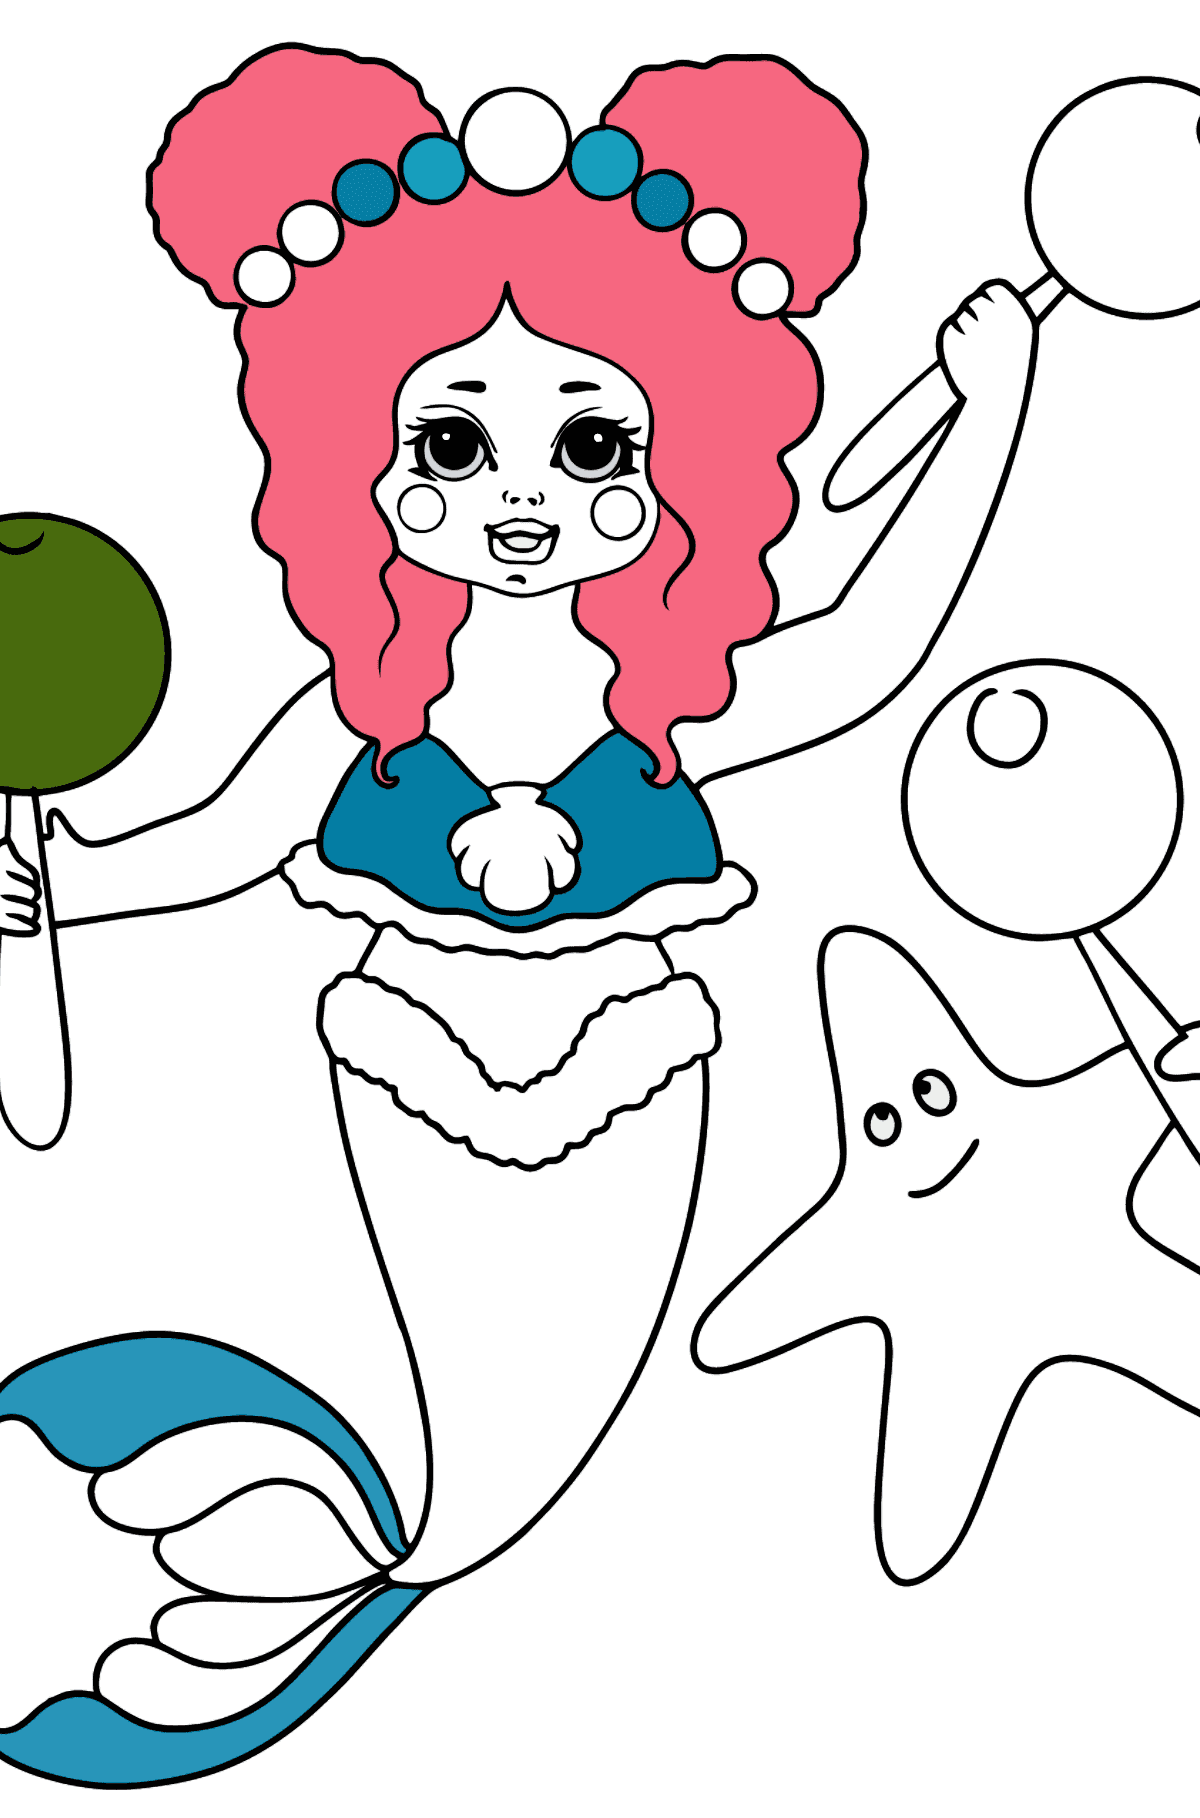 Mermaid and Maracas coloring page - Coloring Pages for Kids